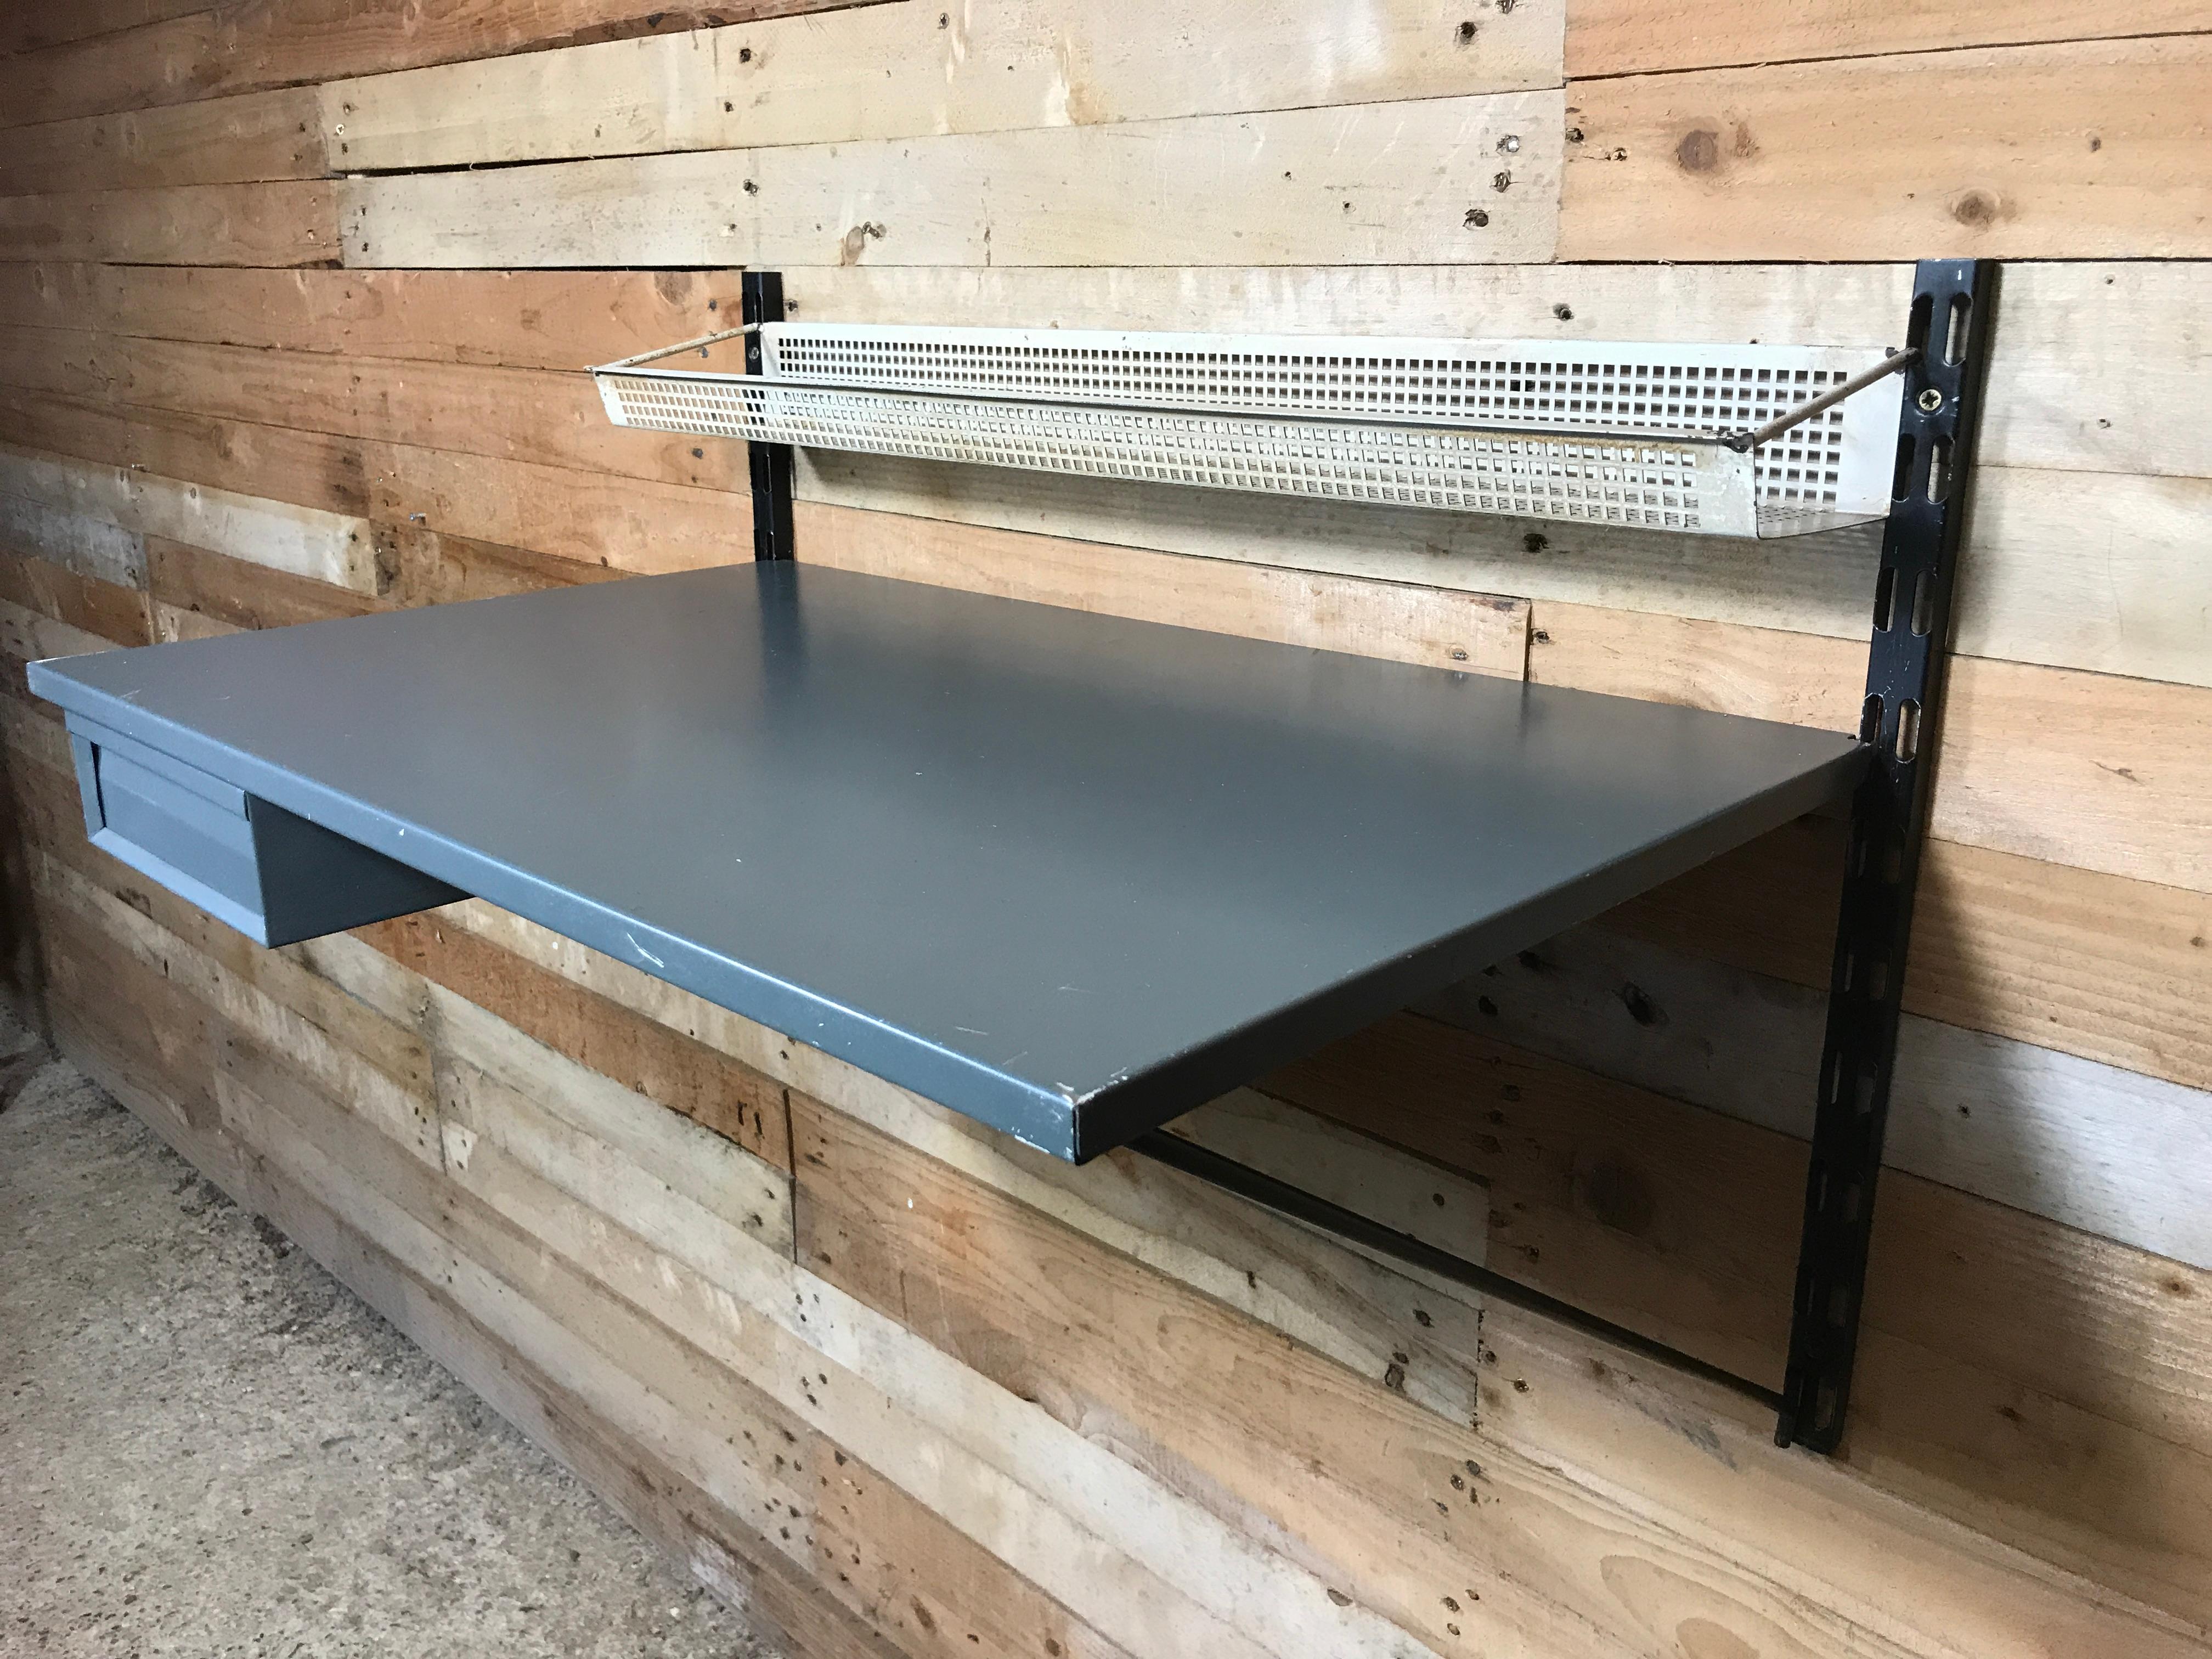 1960 retro Pilastro Tomado shelving grey metal desk unit with drawer and shelf designed by Tjerk Reijenga for Tomado, Holland. The wall unit is in very good vintage condition.

Measures: Height 50cm, depth desk 46cm, width 76cm.